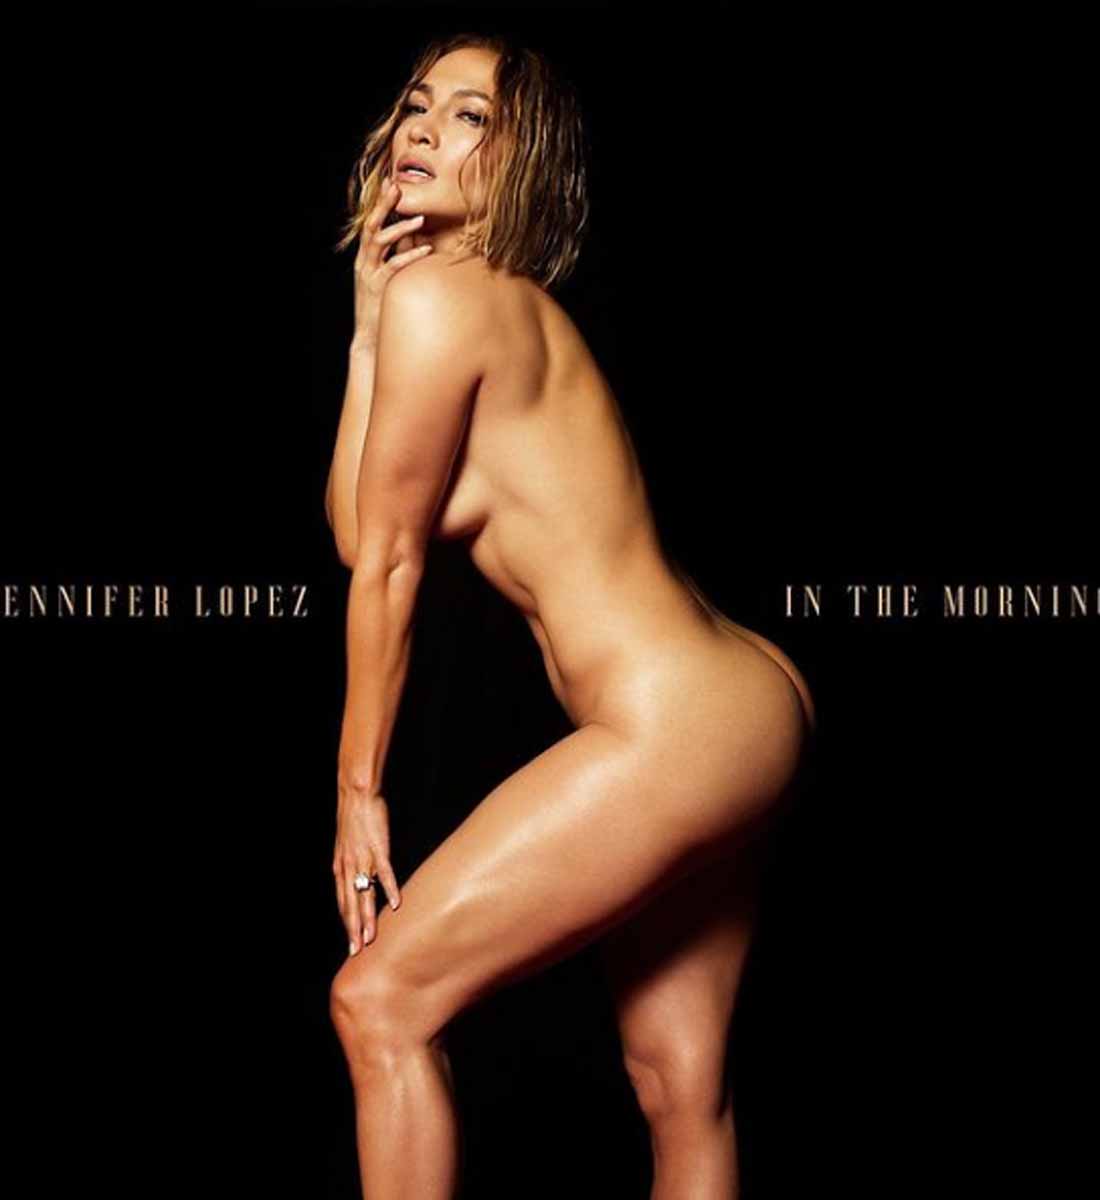 Finally, Jennifer Lopez is a woman and a body - Naked for her new single 157